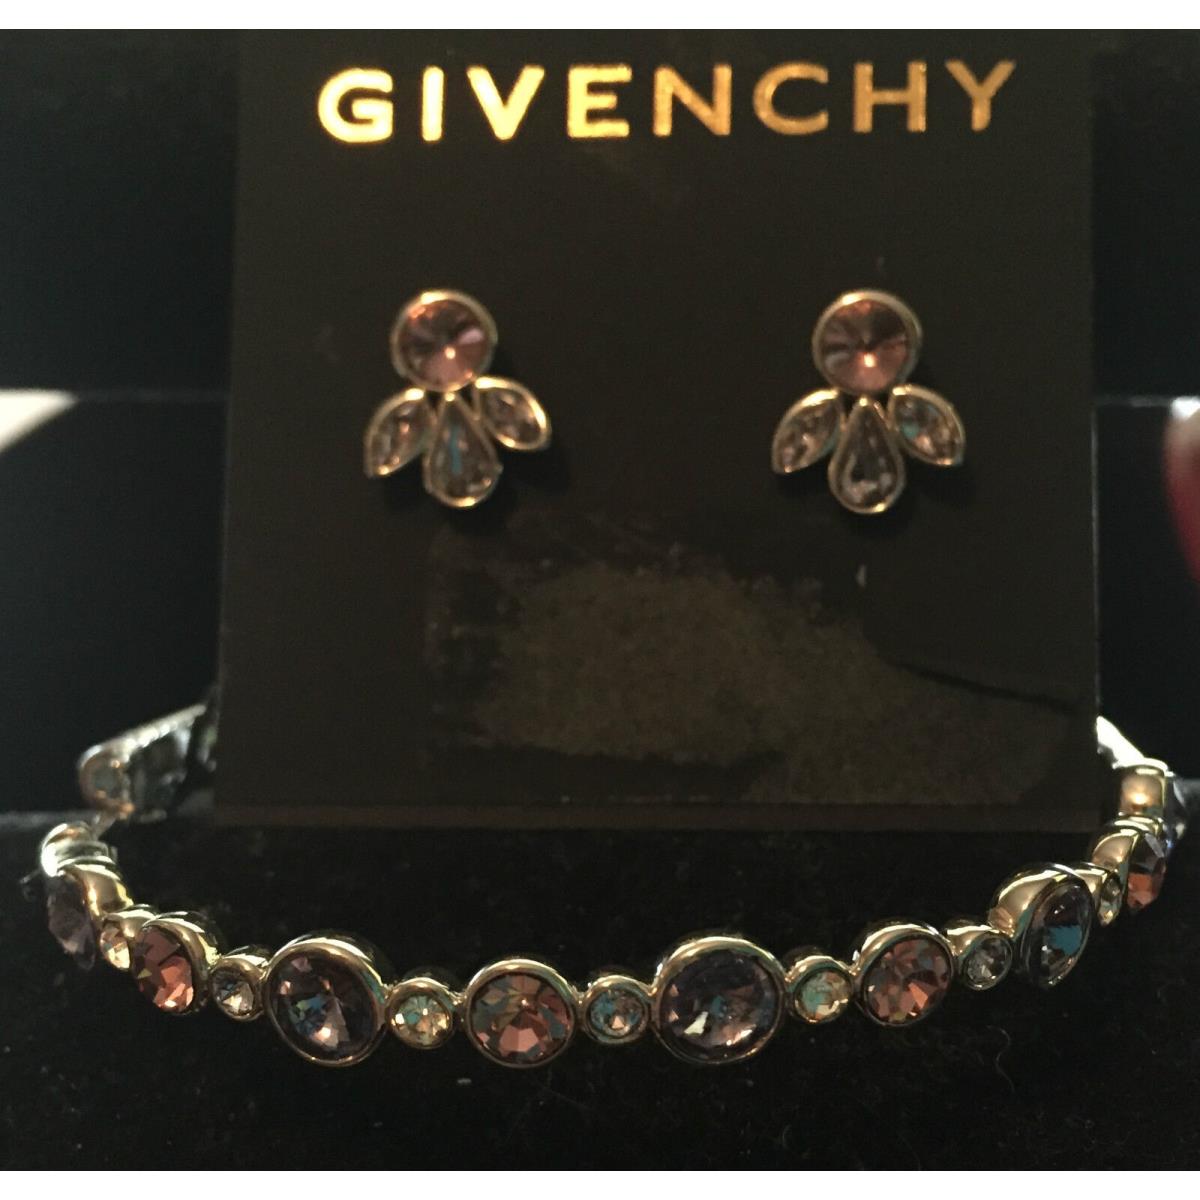 Givenchy Assorted Jewelry Sets --select Your Favorite Pink/Blue/Clear Bangle + Earrings